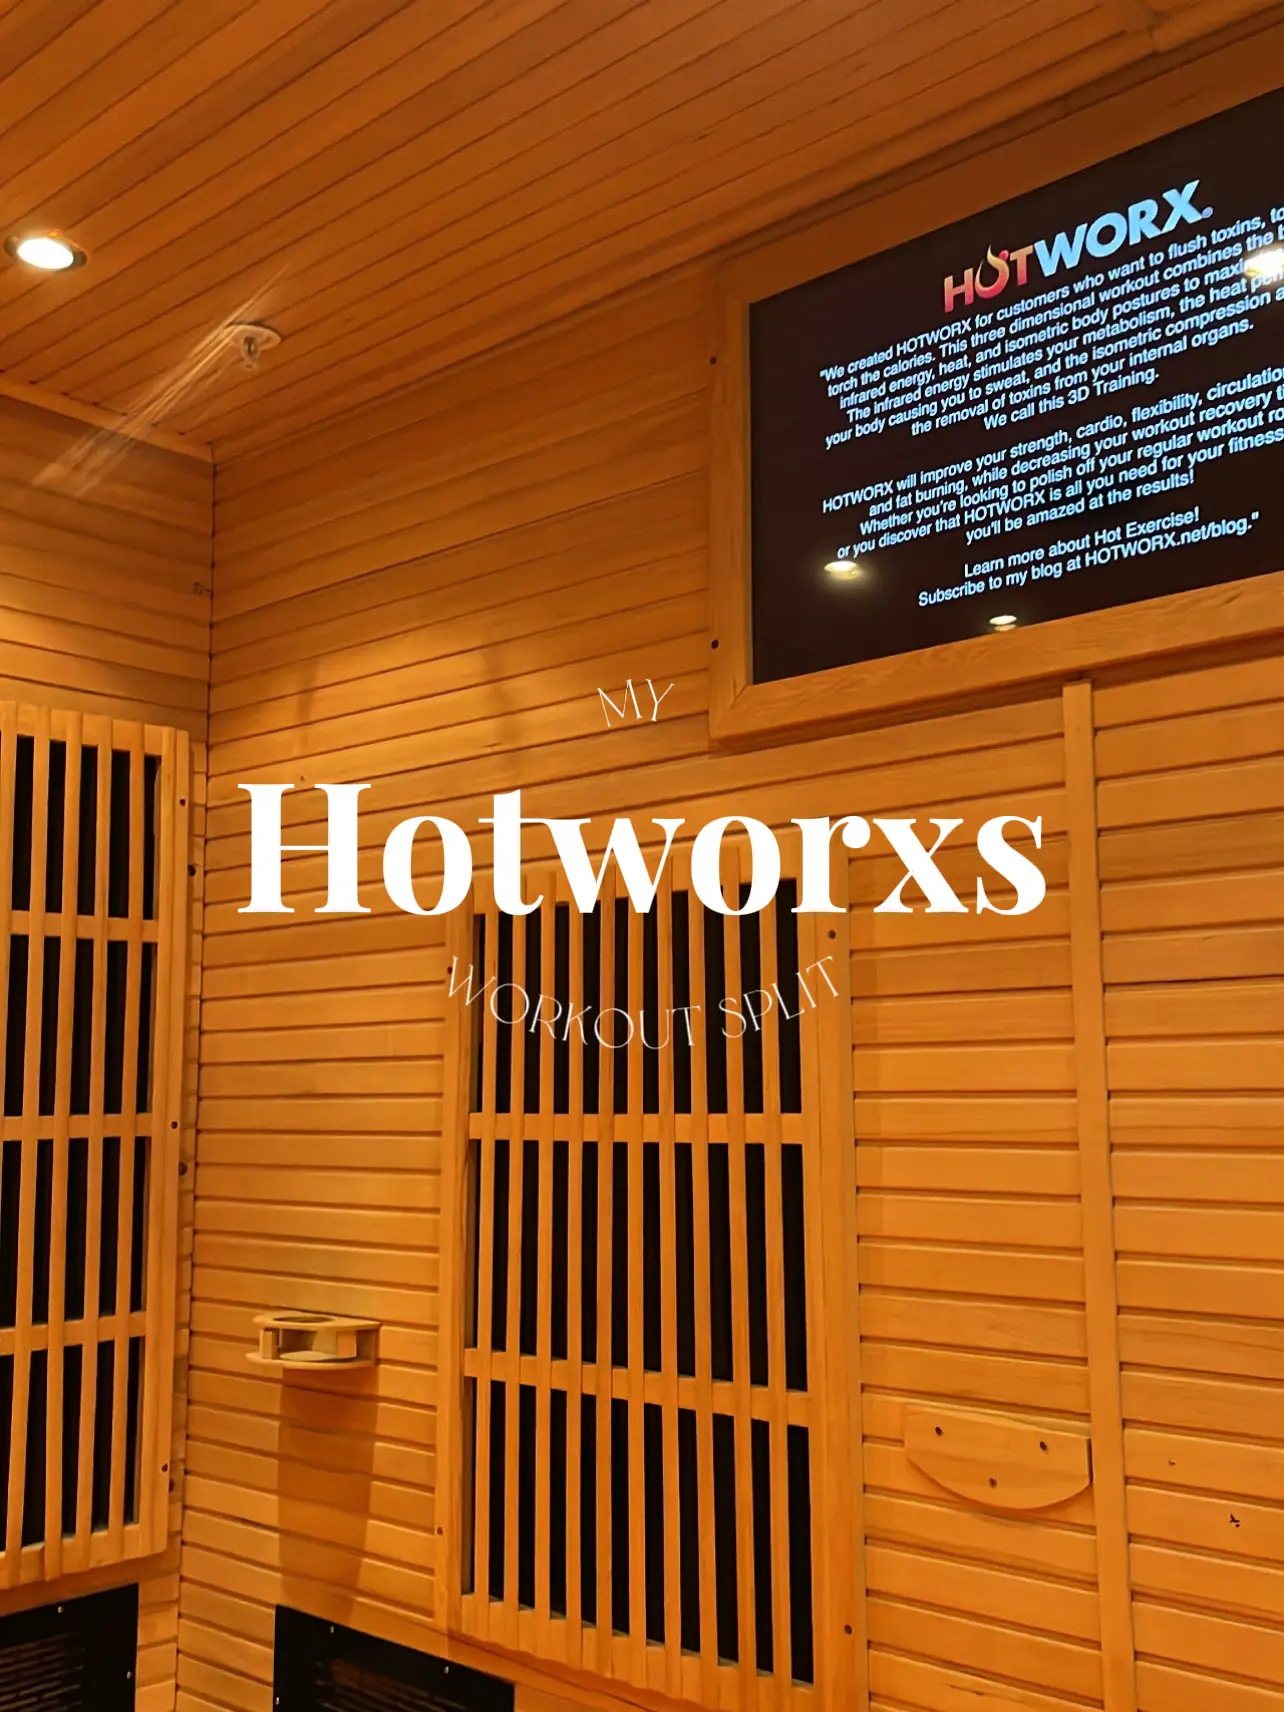 HOTWORX yoga mat & towel needed to workout in HOTWORX sauna